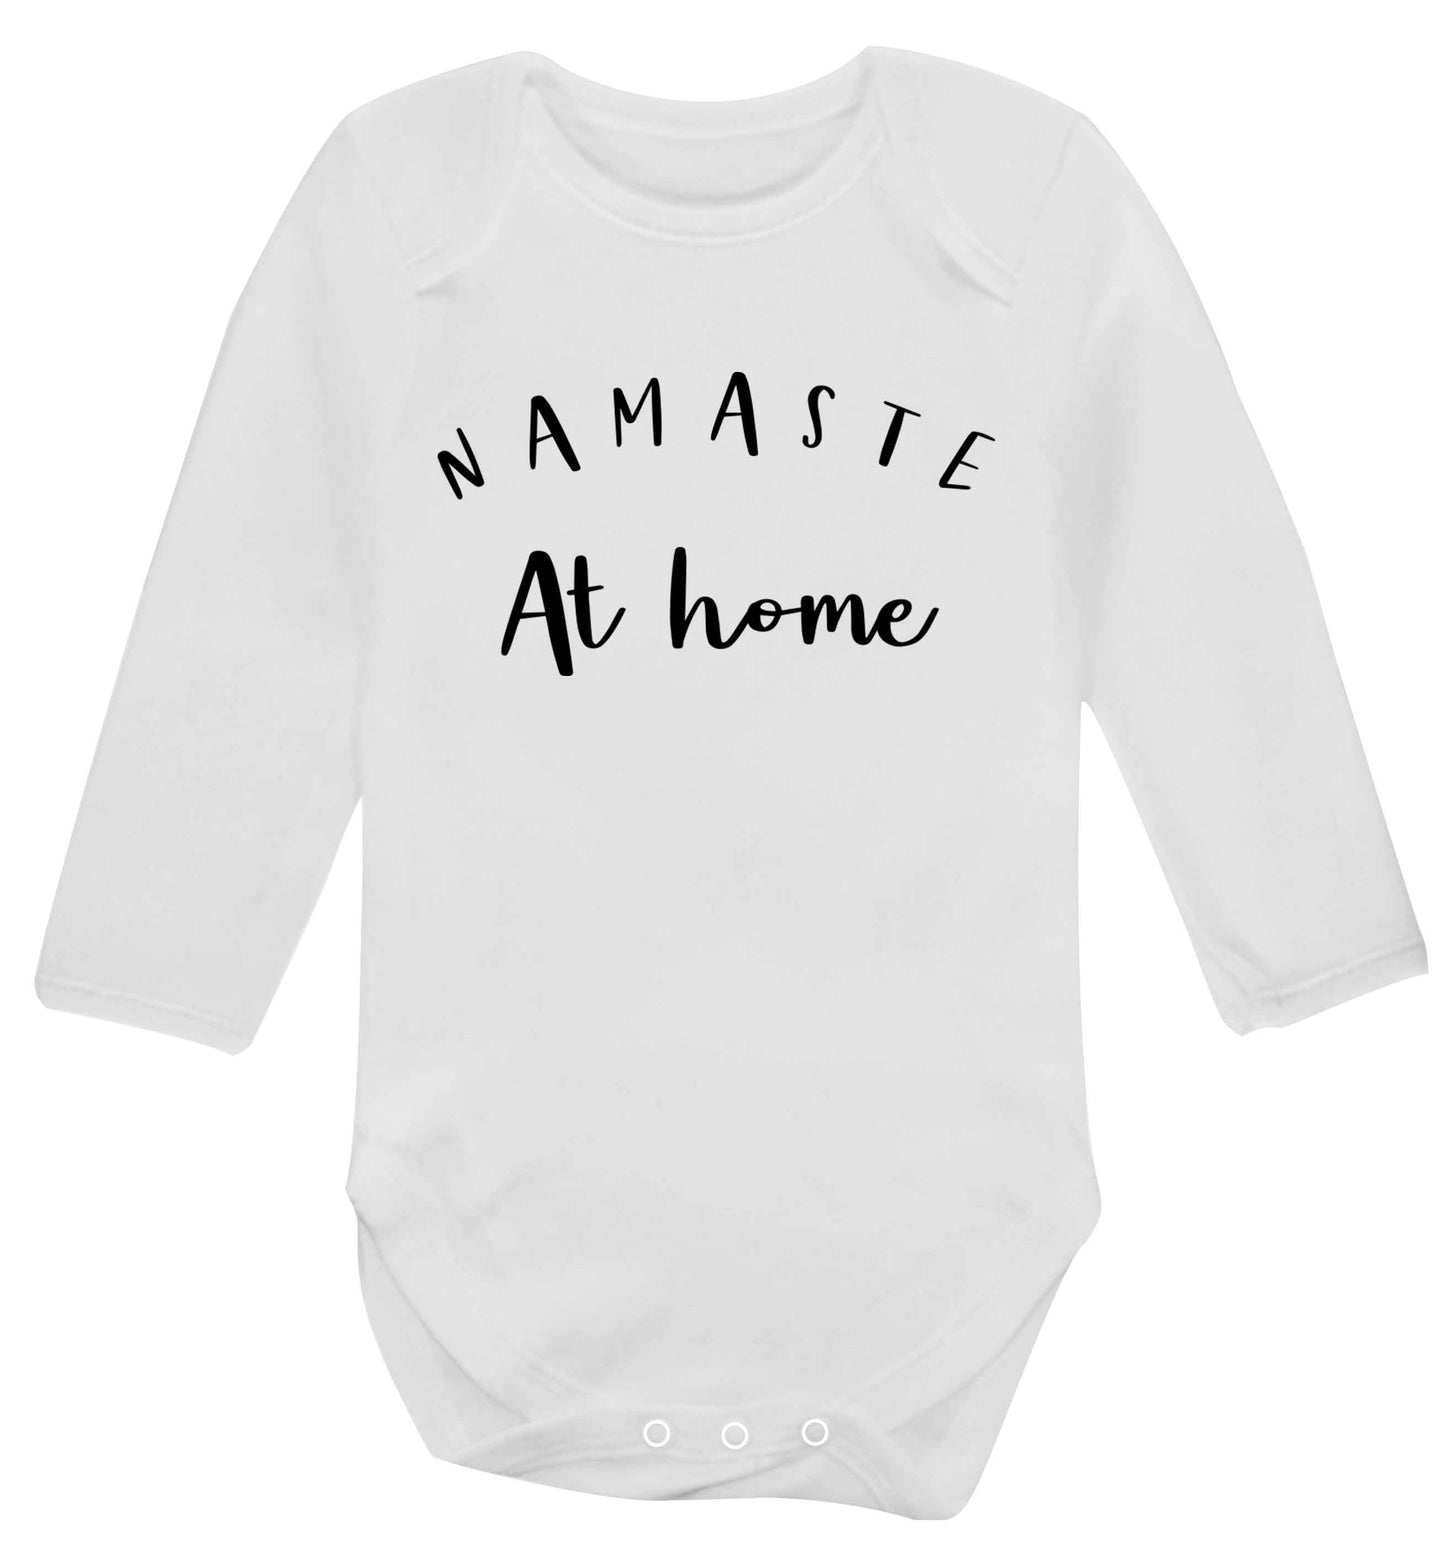 Namaste at home Baby Vest long sleeved white 6-12 months